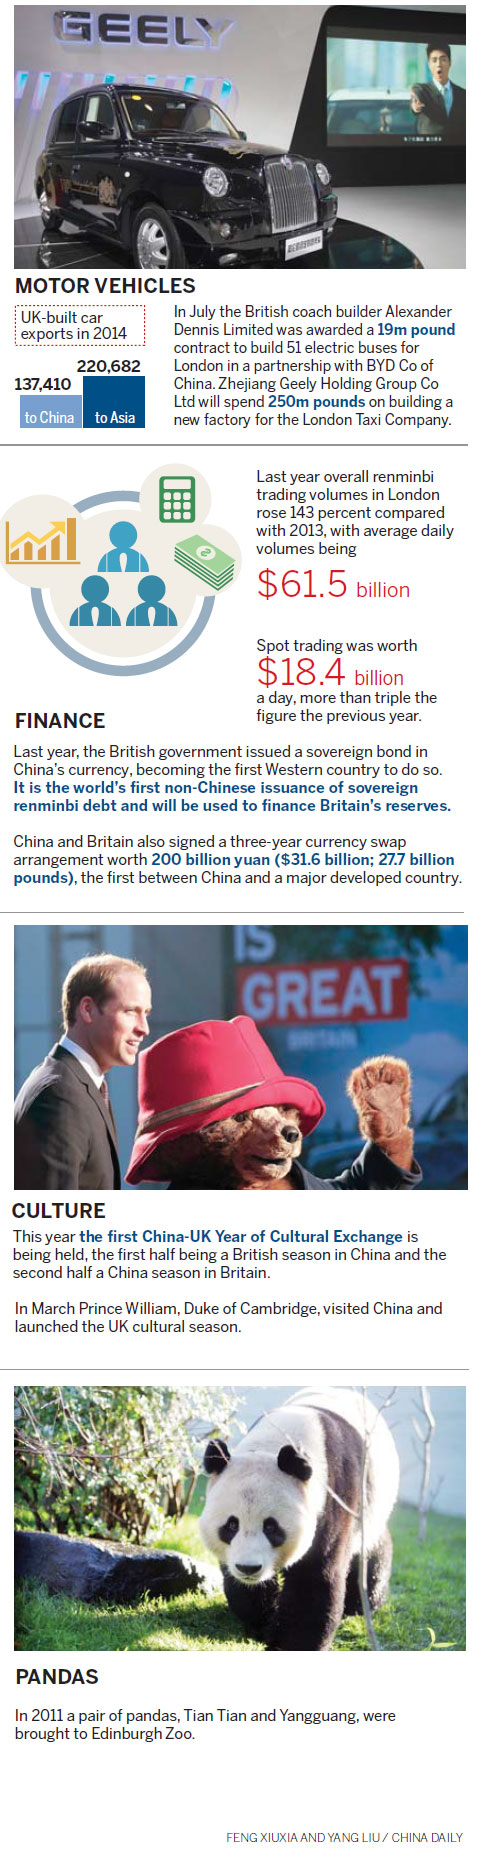 The China-Britain relationship in dates and figures